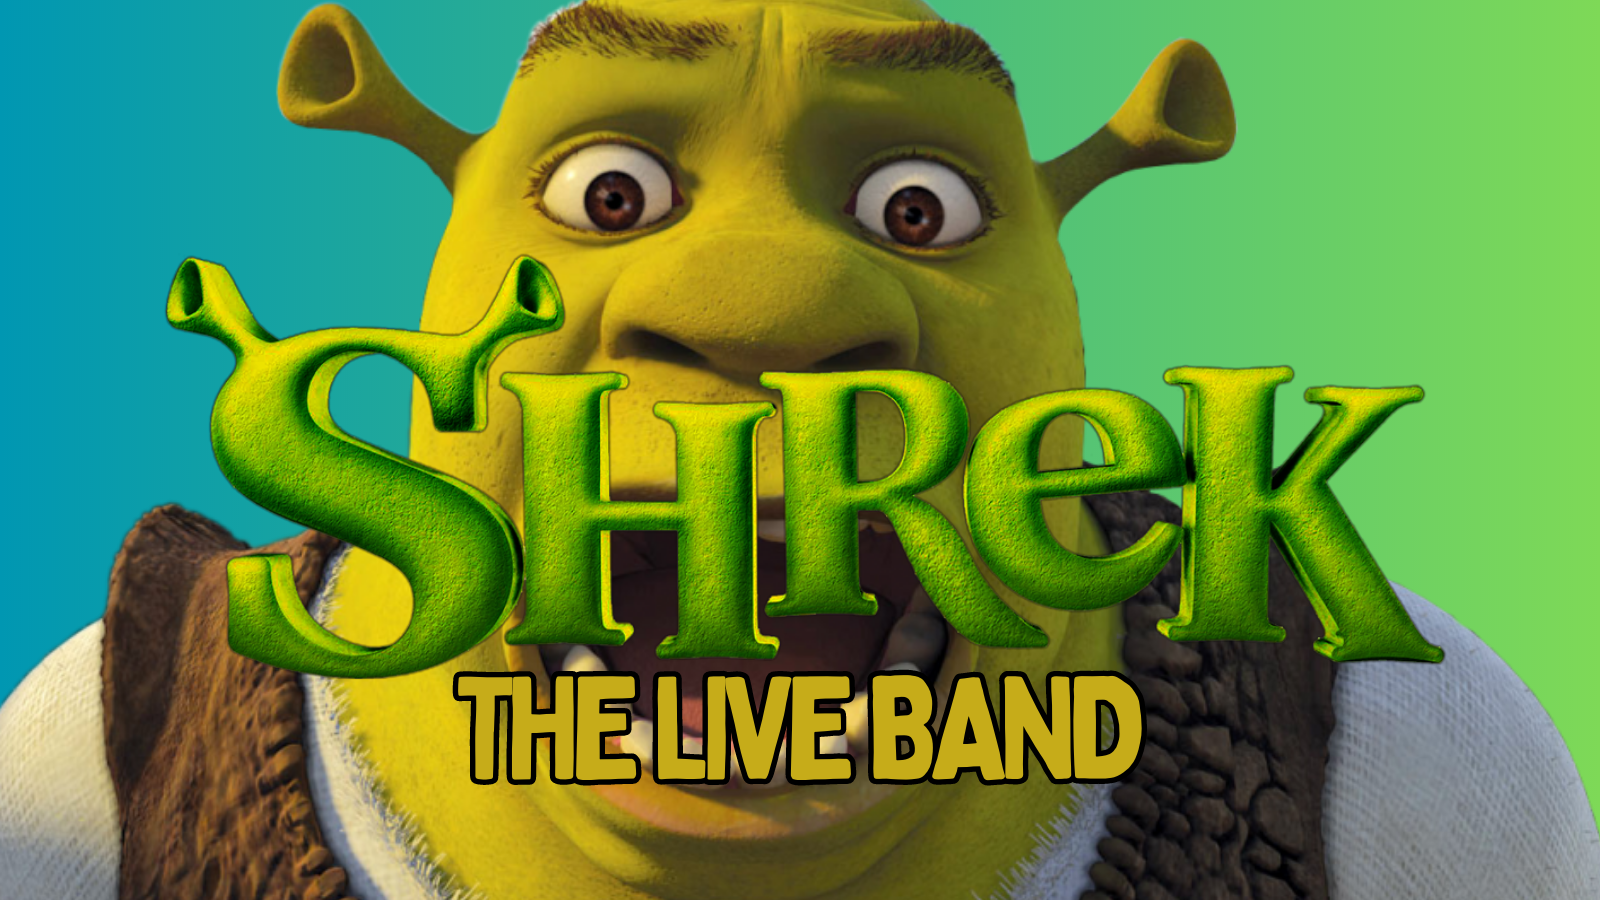 Shrek Live – THE BEST SONGS FROM THE GREATEST MOVIE SOUNDTRACK PERFORMED WITH A LIVE BAND